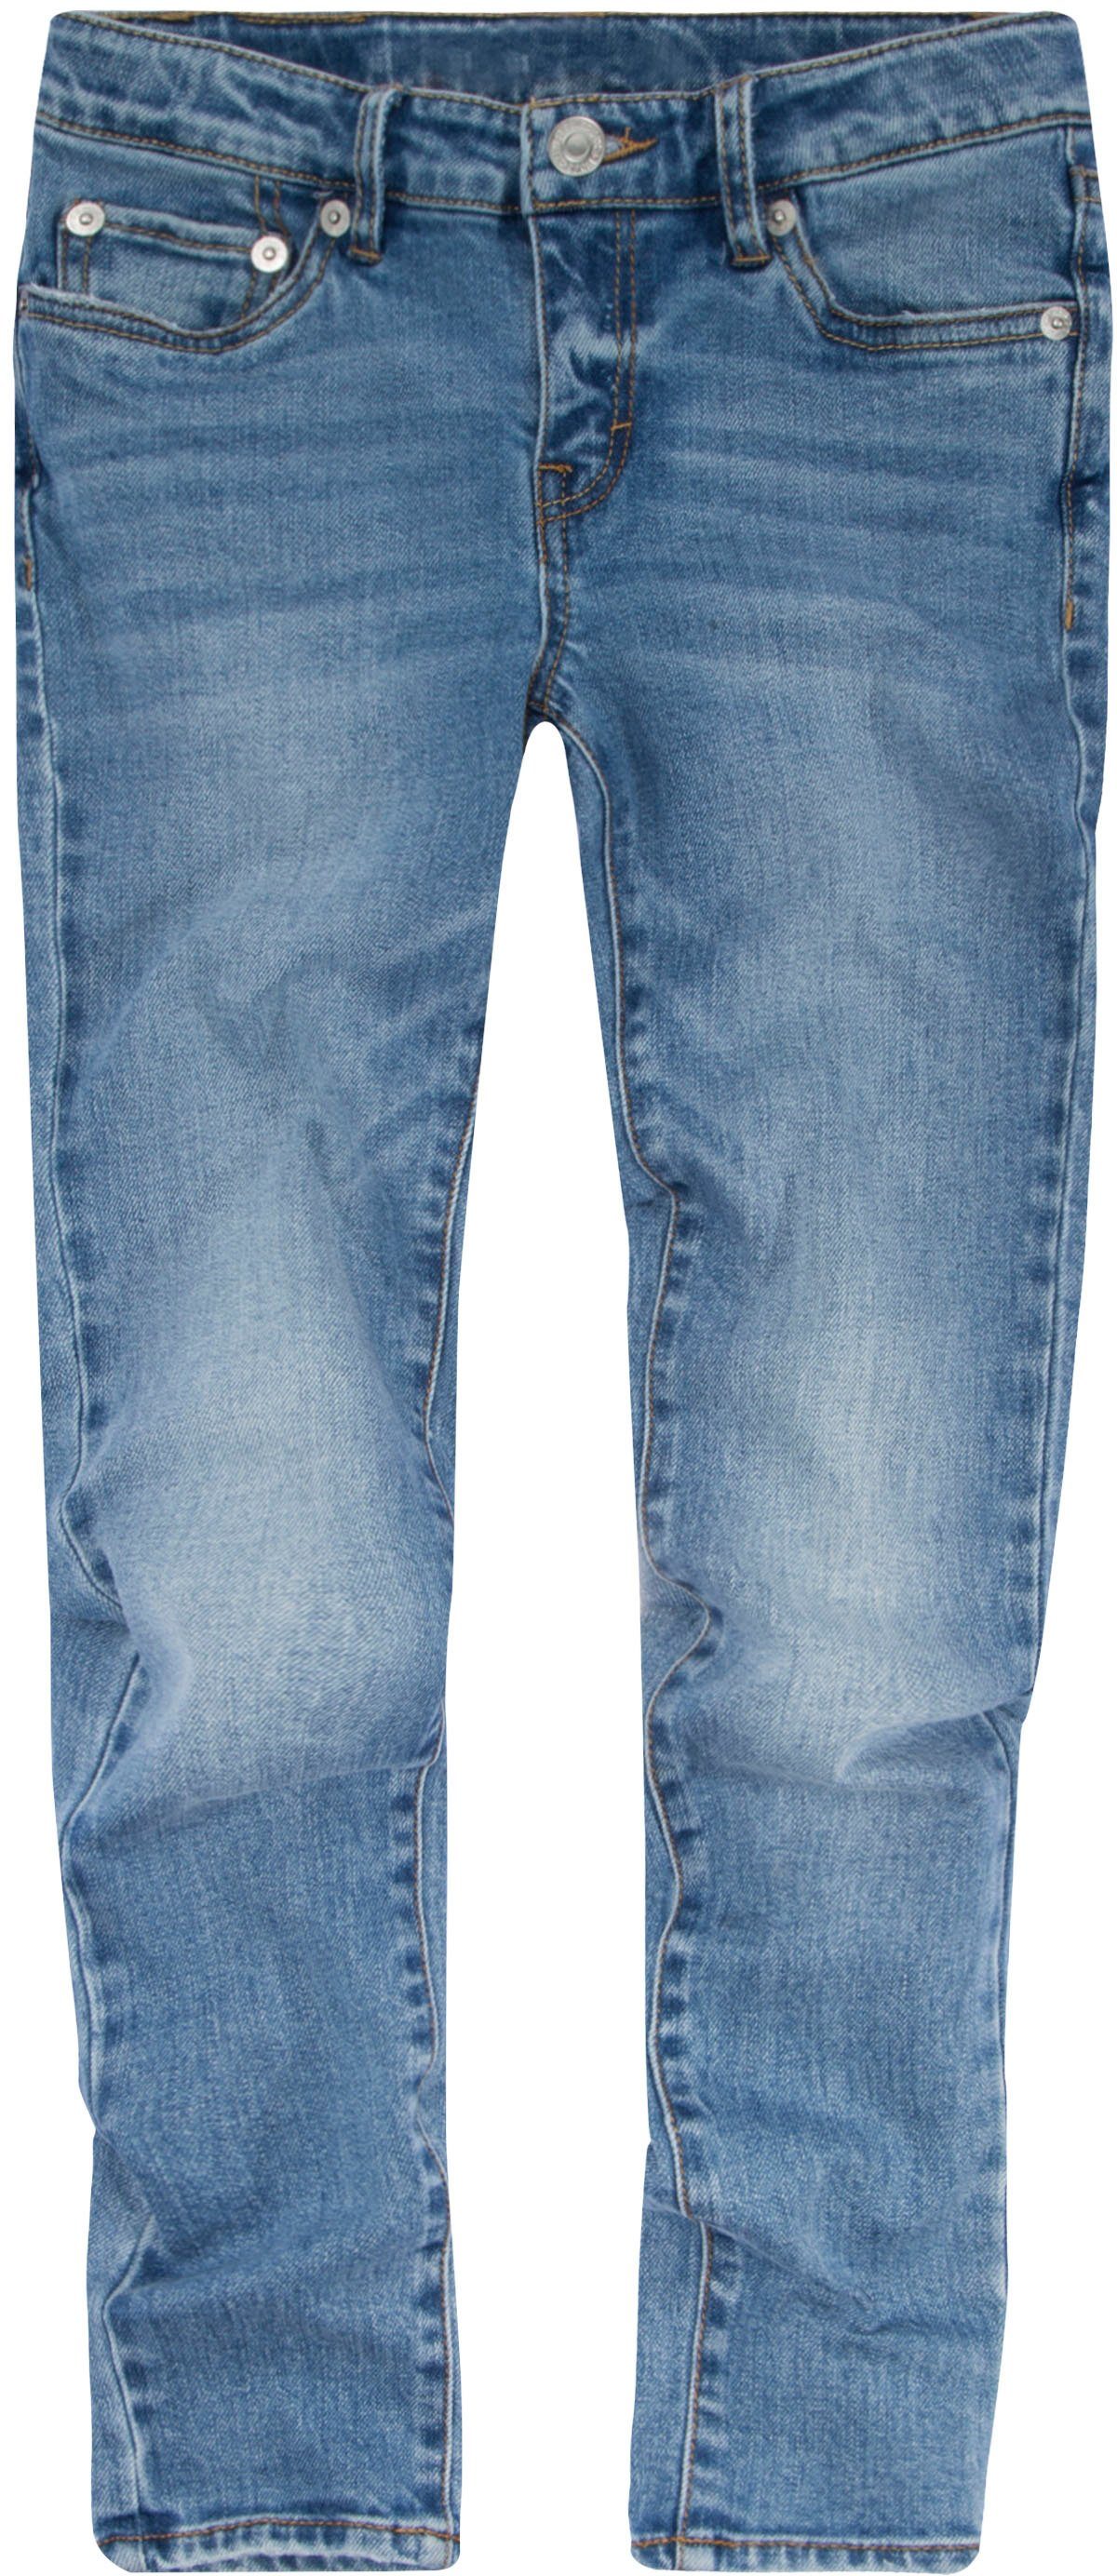 SKINNY for SUPER Kids FIT Stretch-Jeans GIRLS Levi's® bleached 710™ used JEANS